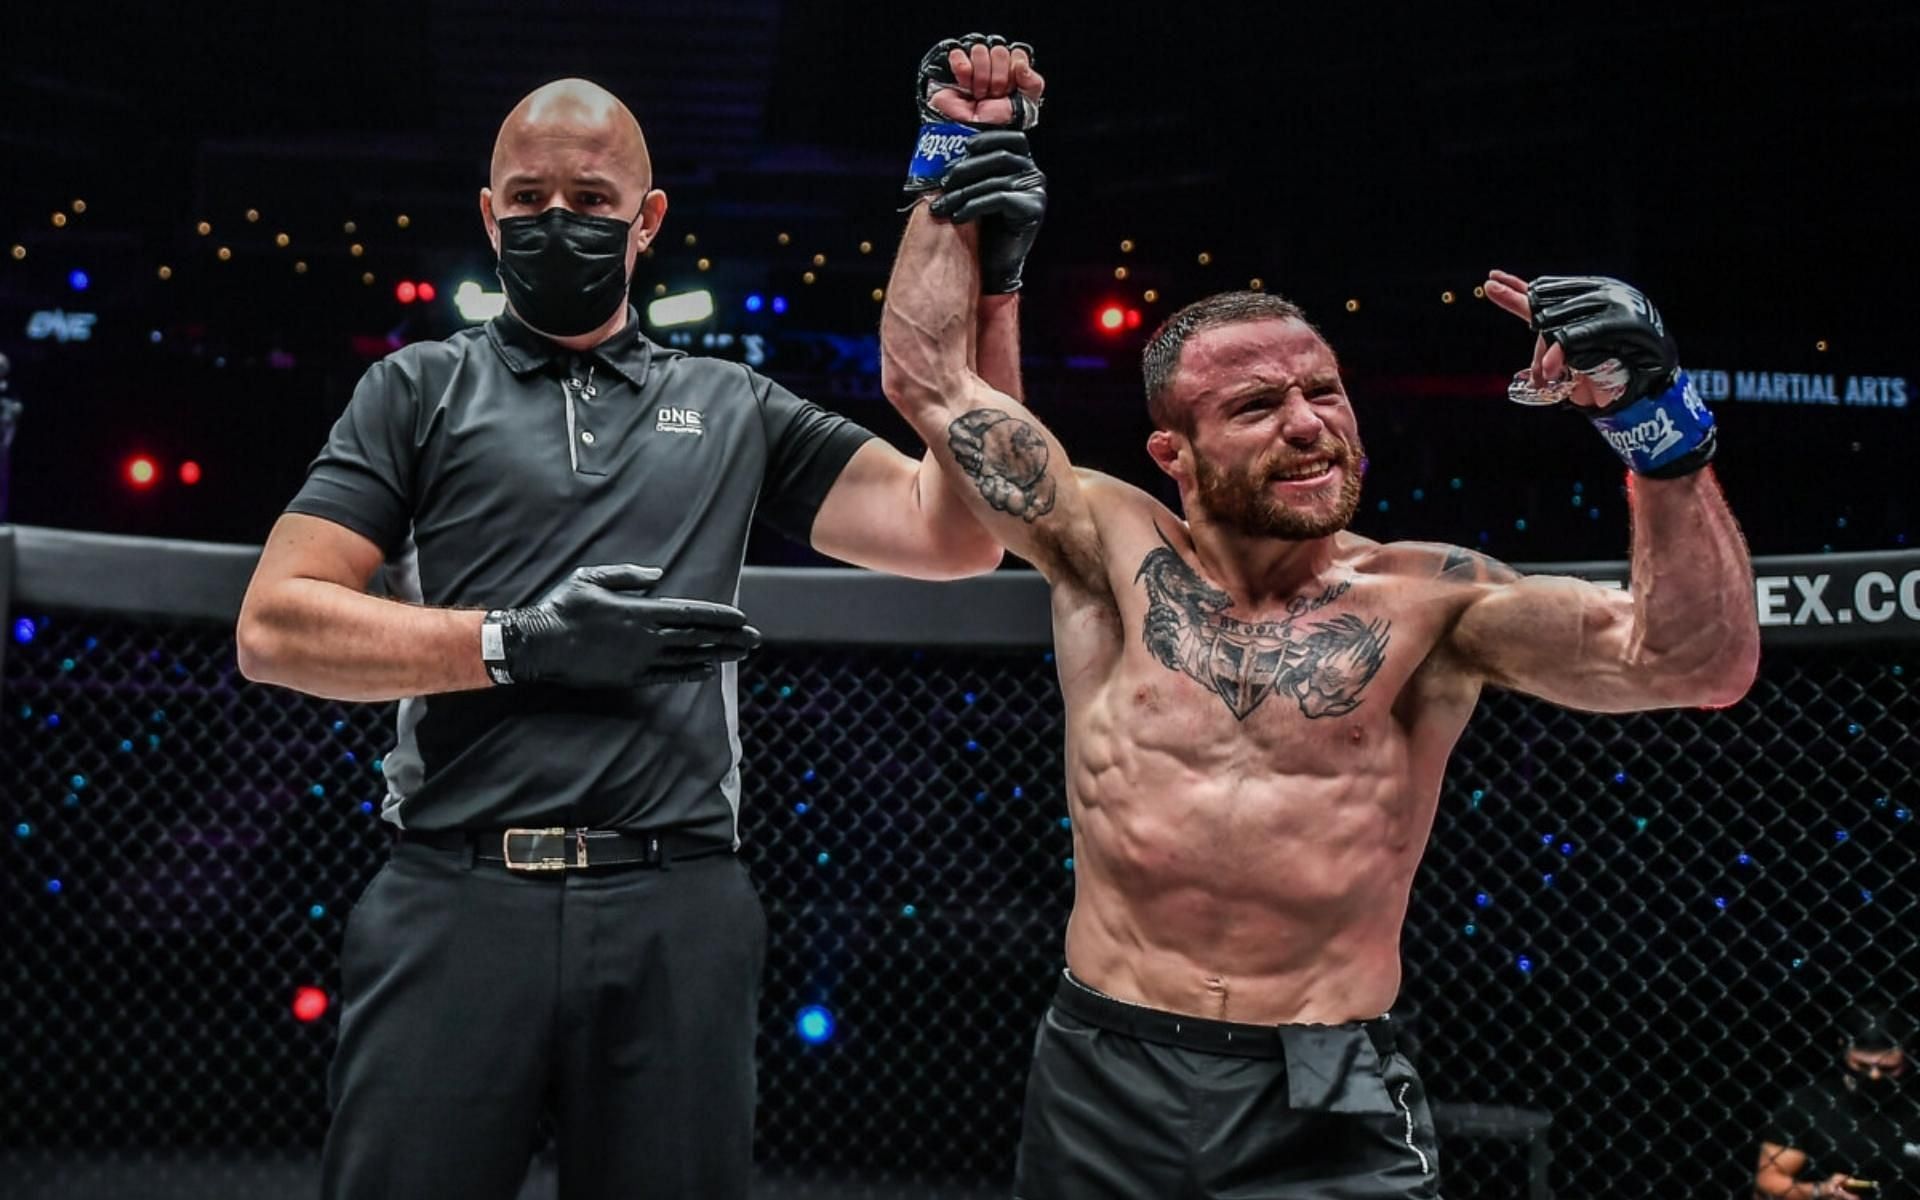 ONE Championship strawweight Jarred Brooks made one of the best debuts of 2021. (Image courtesy of ONE Championship)